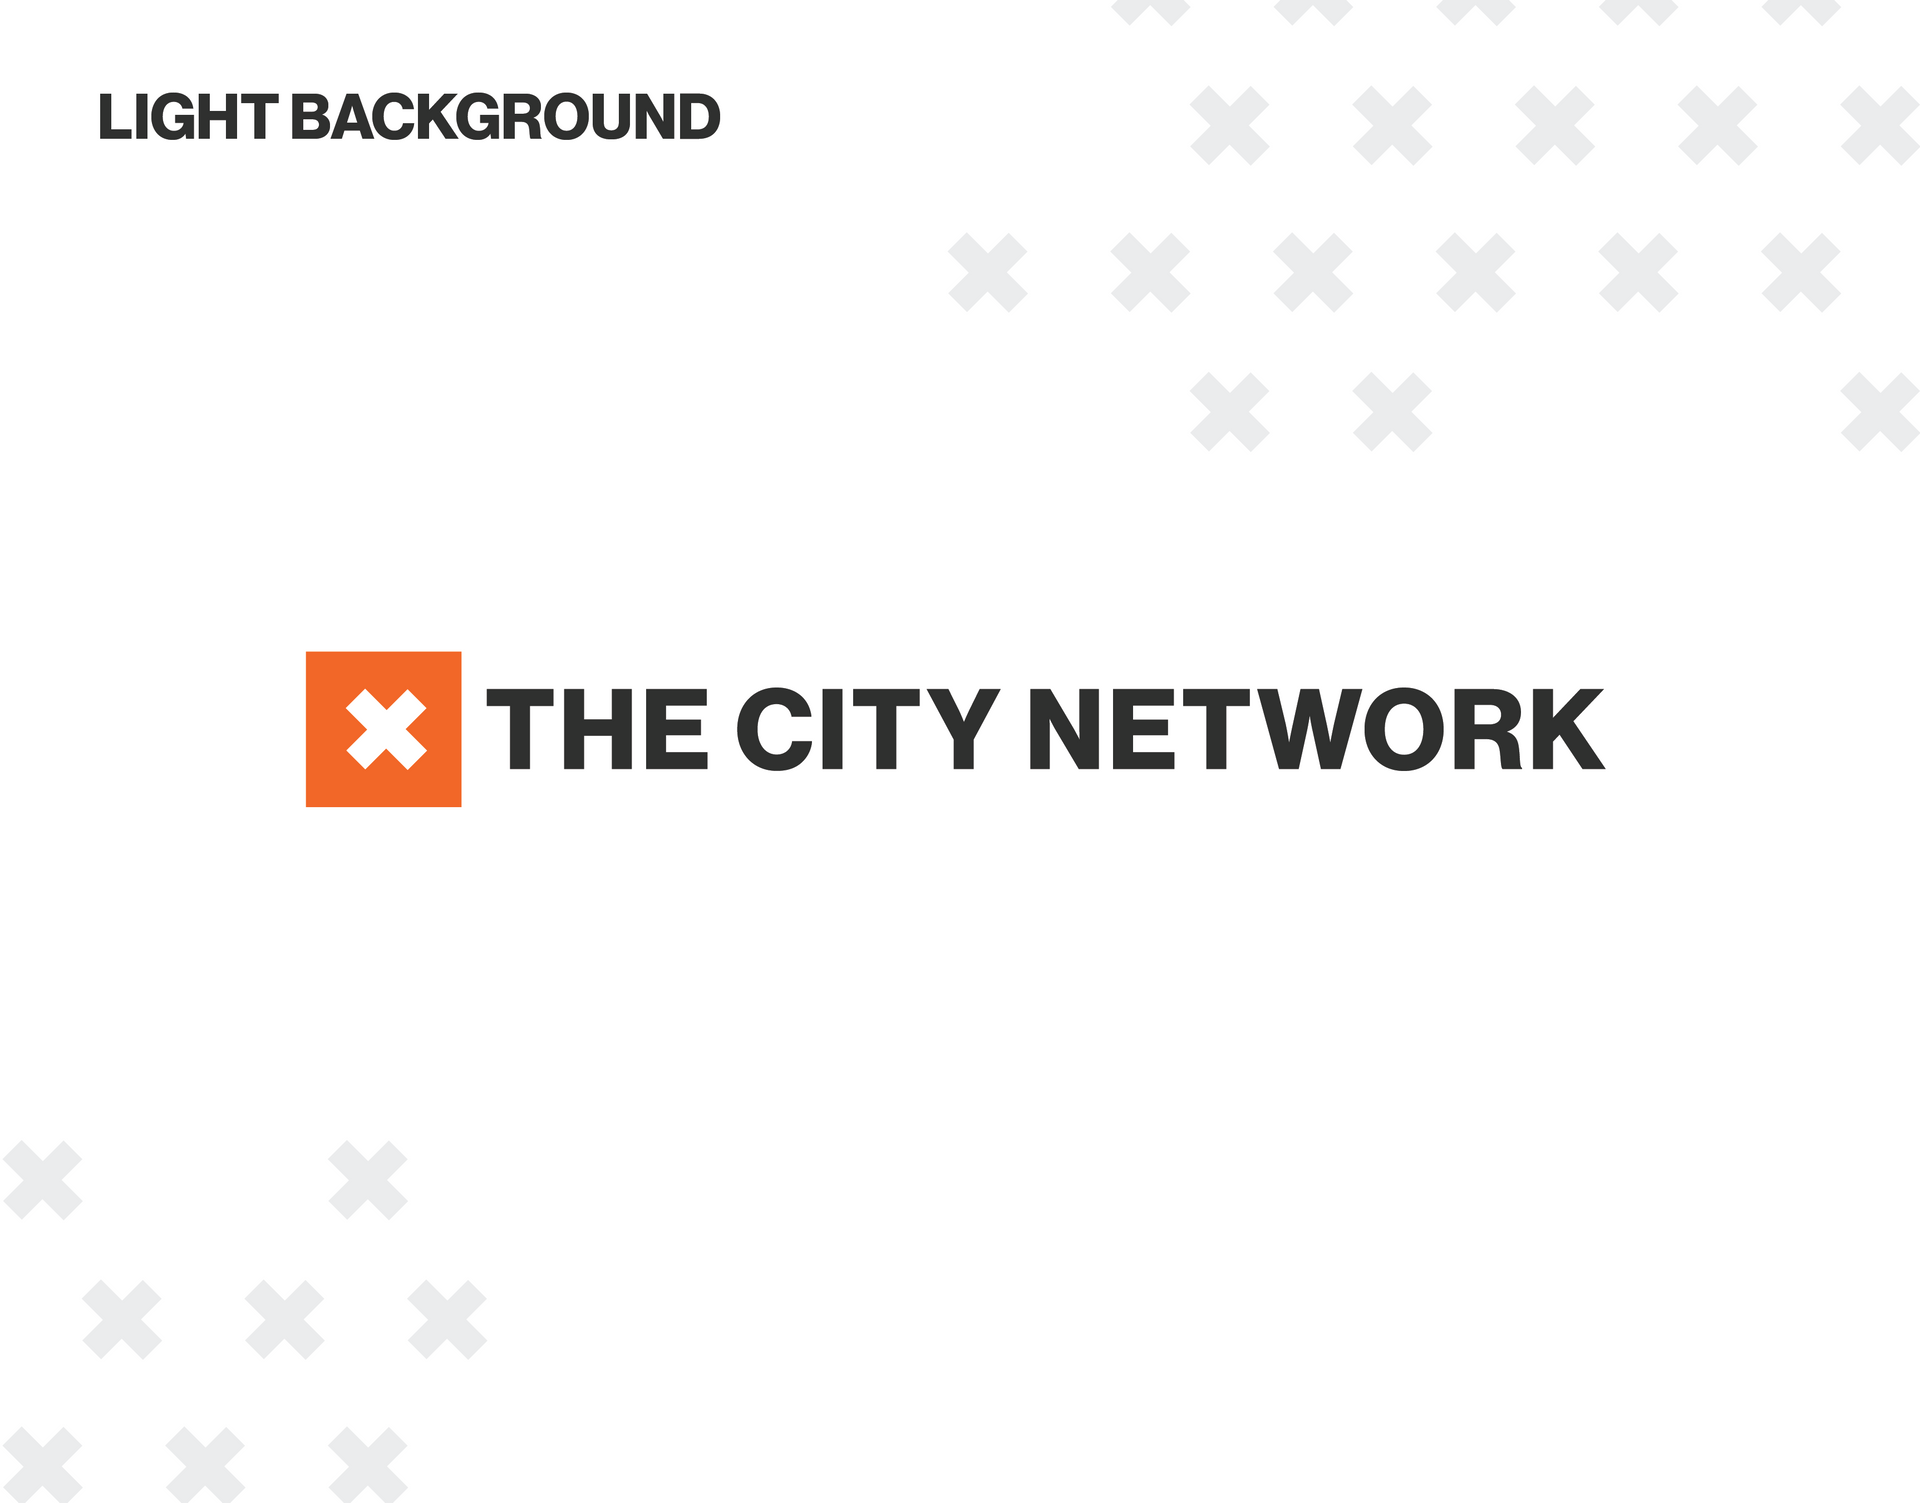 A logo for the city network with a light background